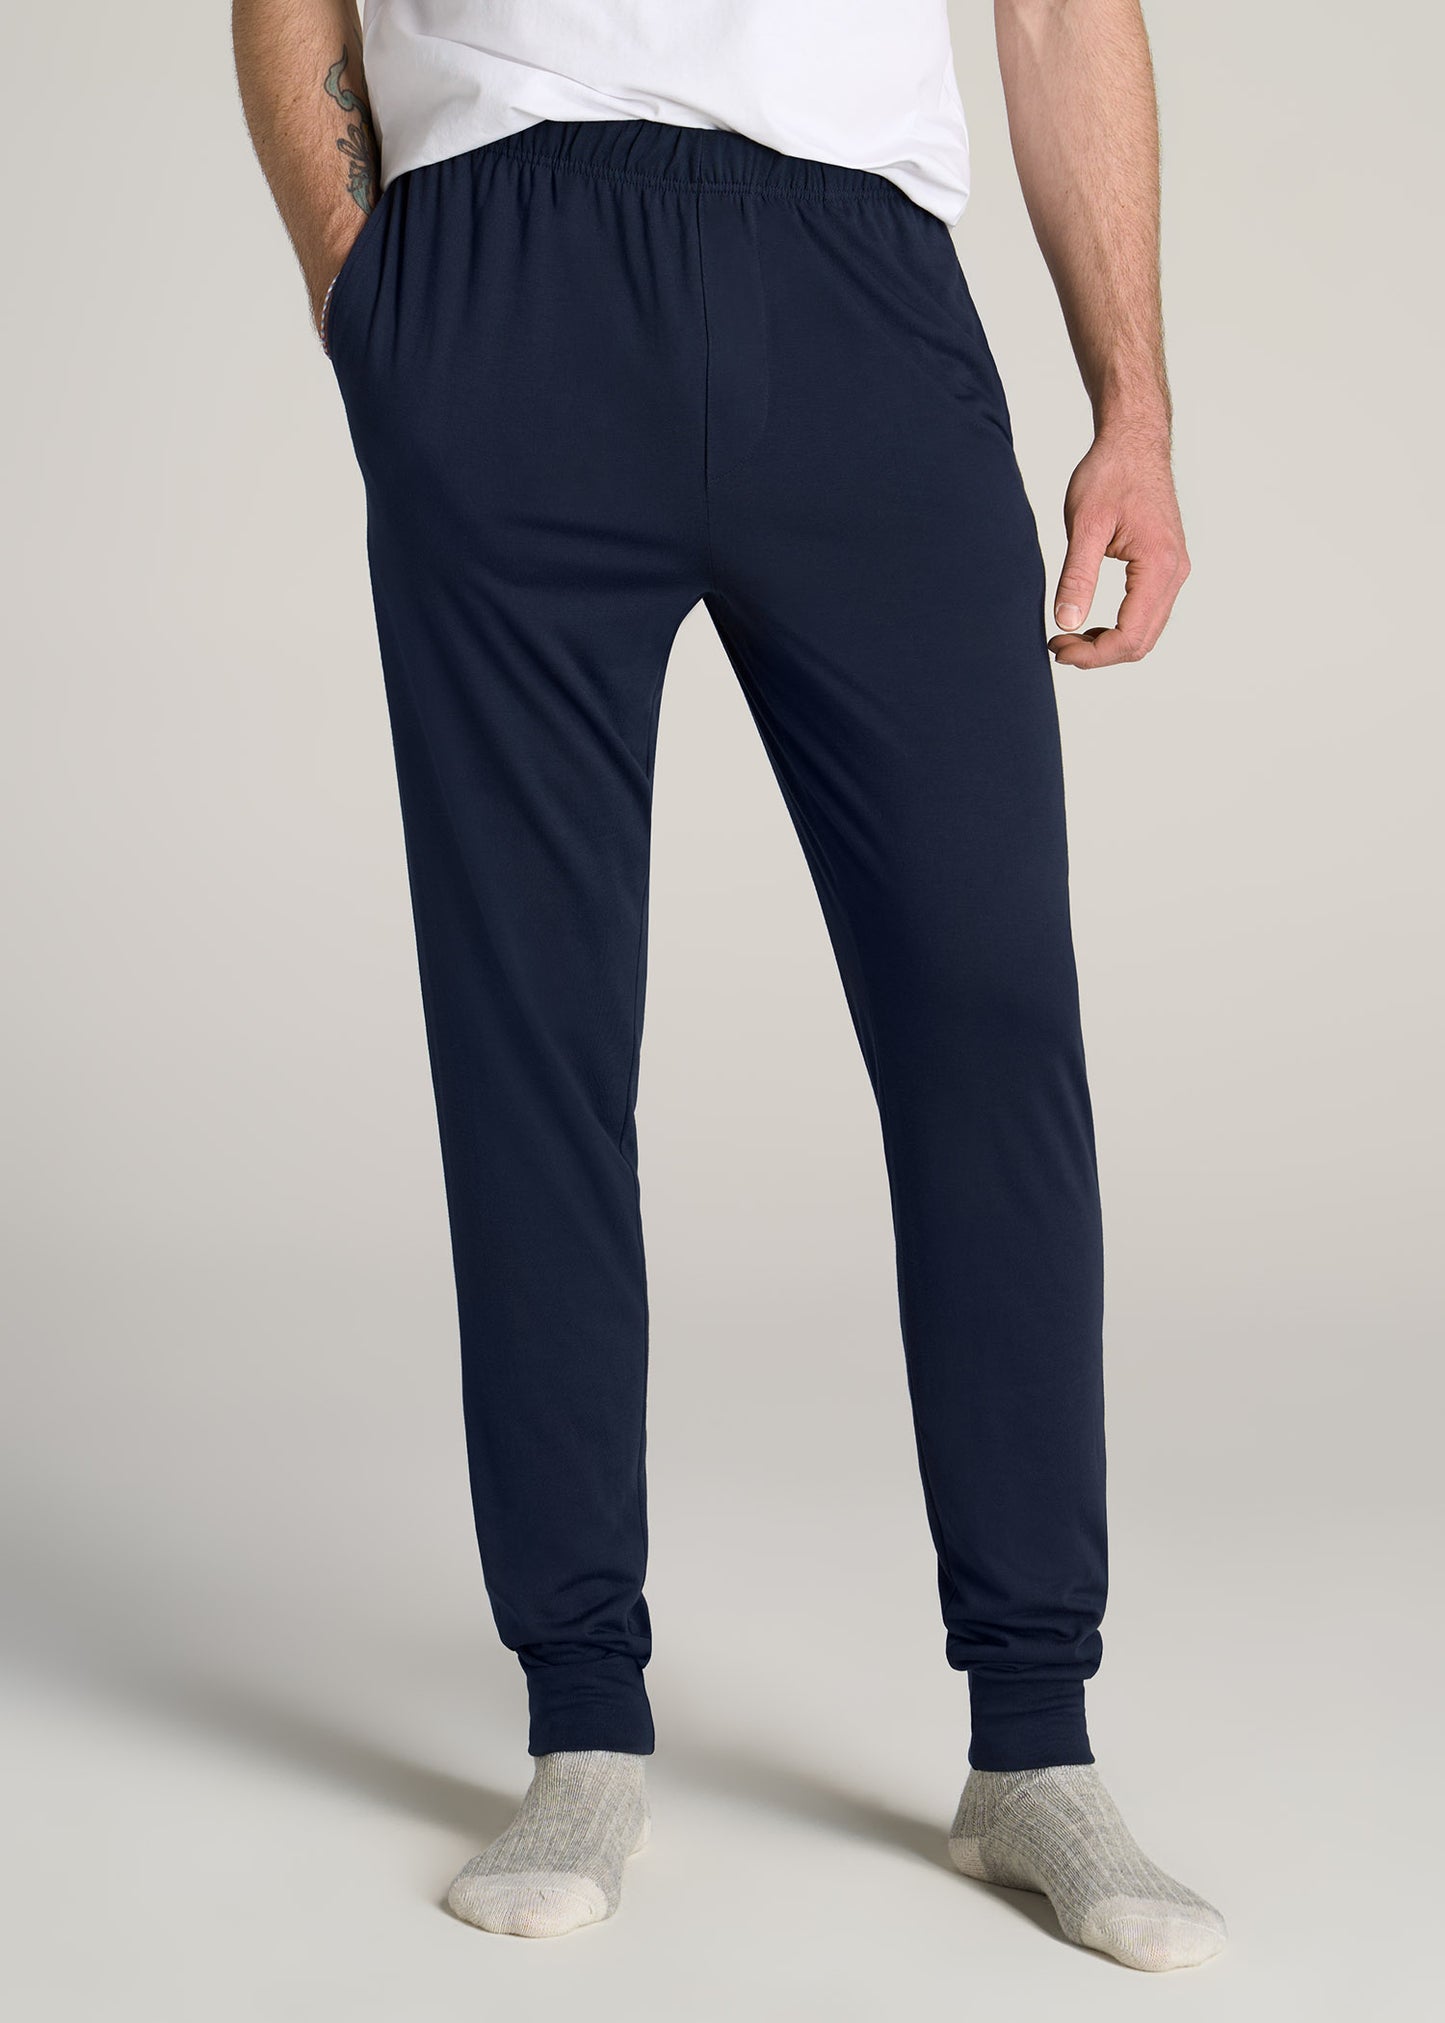 American-Tall-Men-Lounge-Pant-Joggers-Navy-front